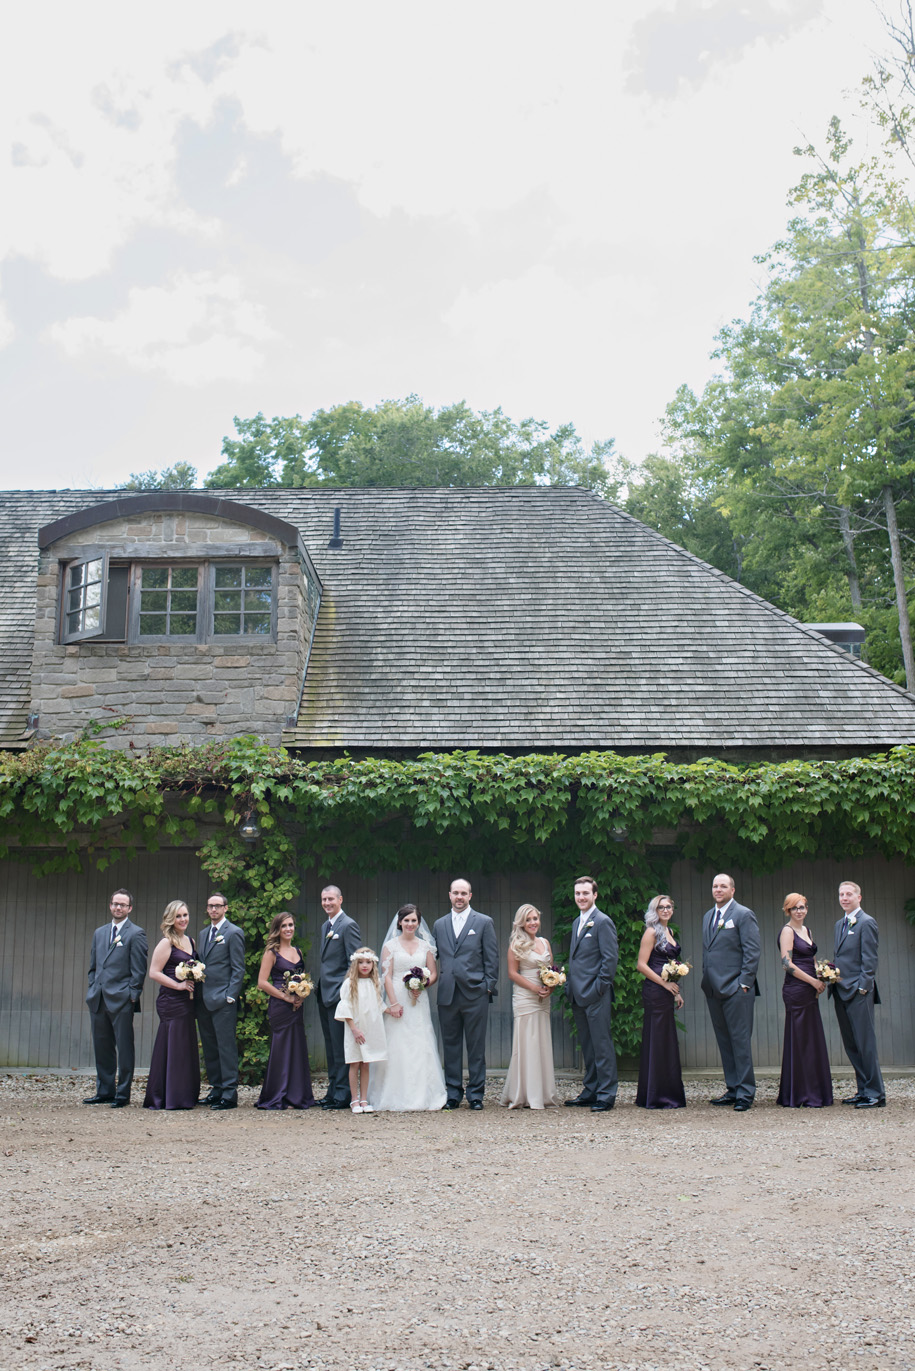 I love a vintage inspired wedding party portrait l Purple, Cream and Grey Wedding l Rustic and Romantic Outdoor Inner Circle Estate Wedding in the woods by Kari Dawson